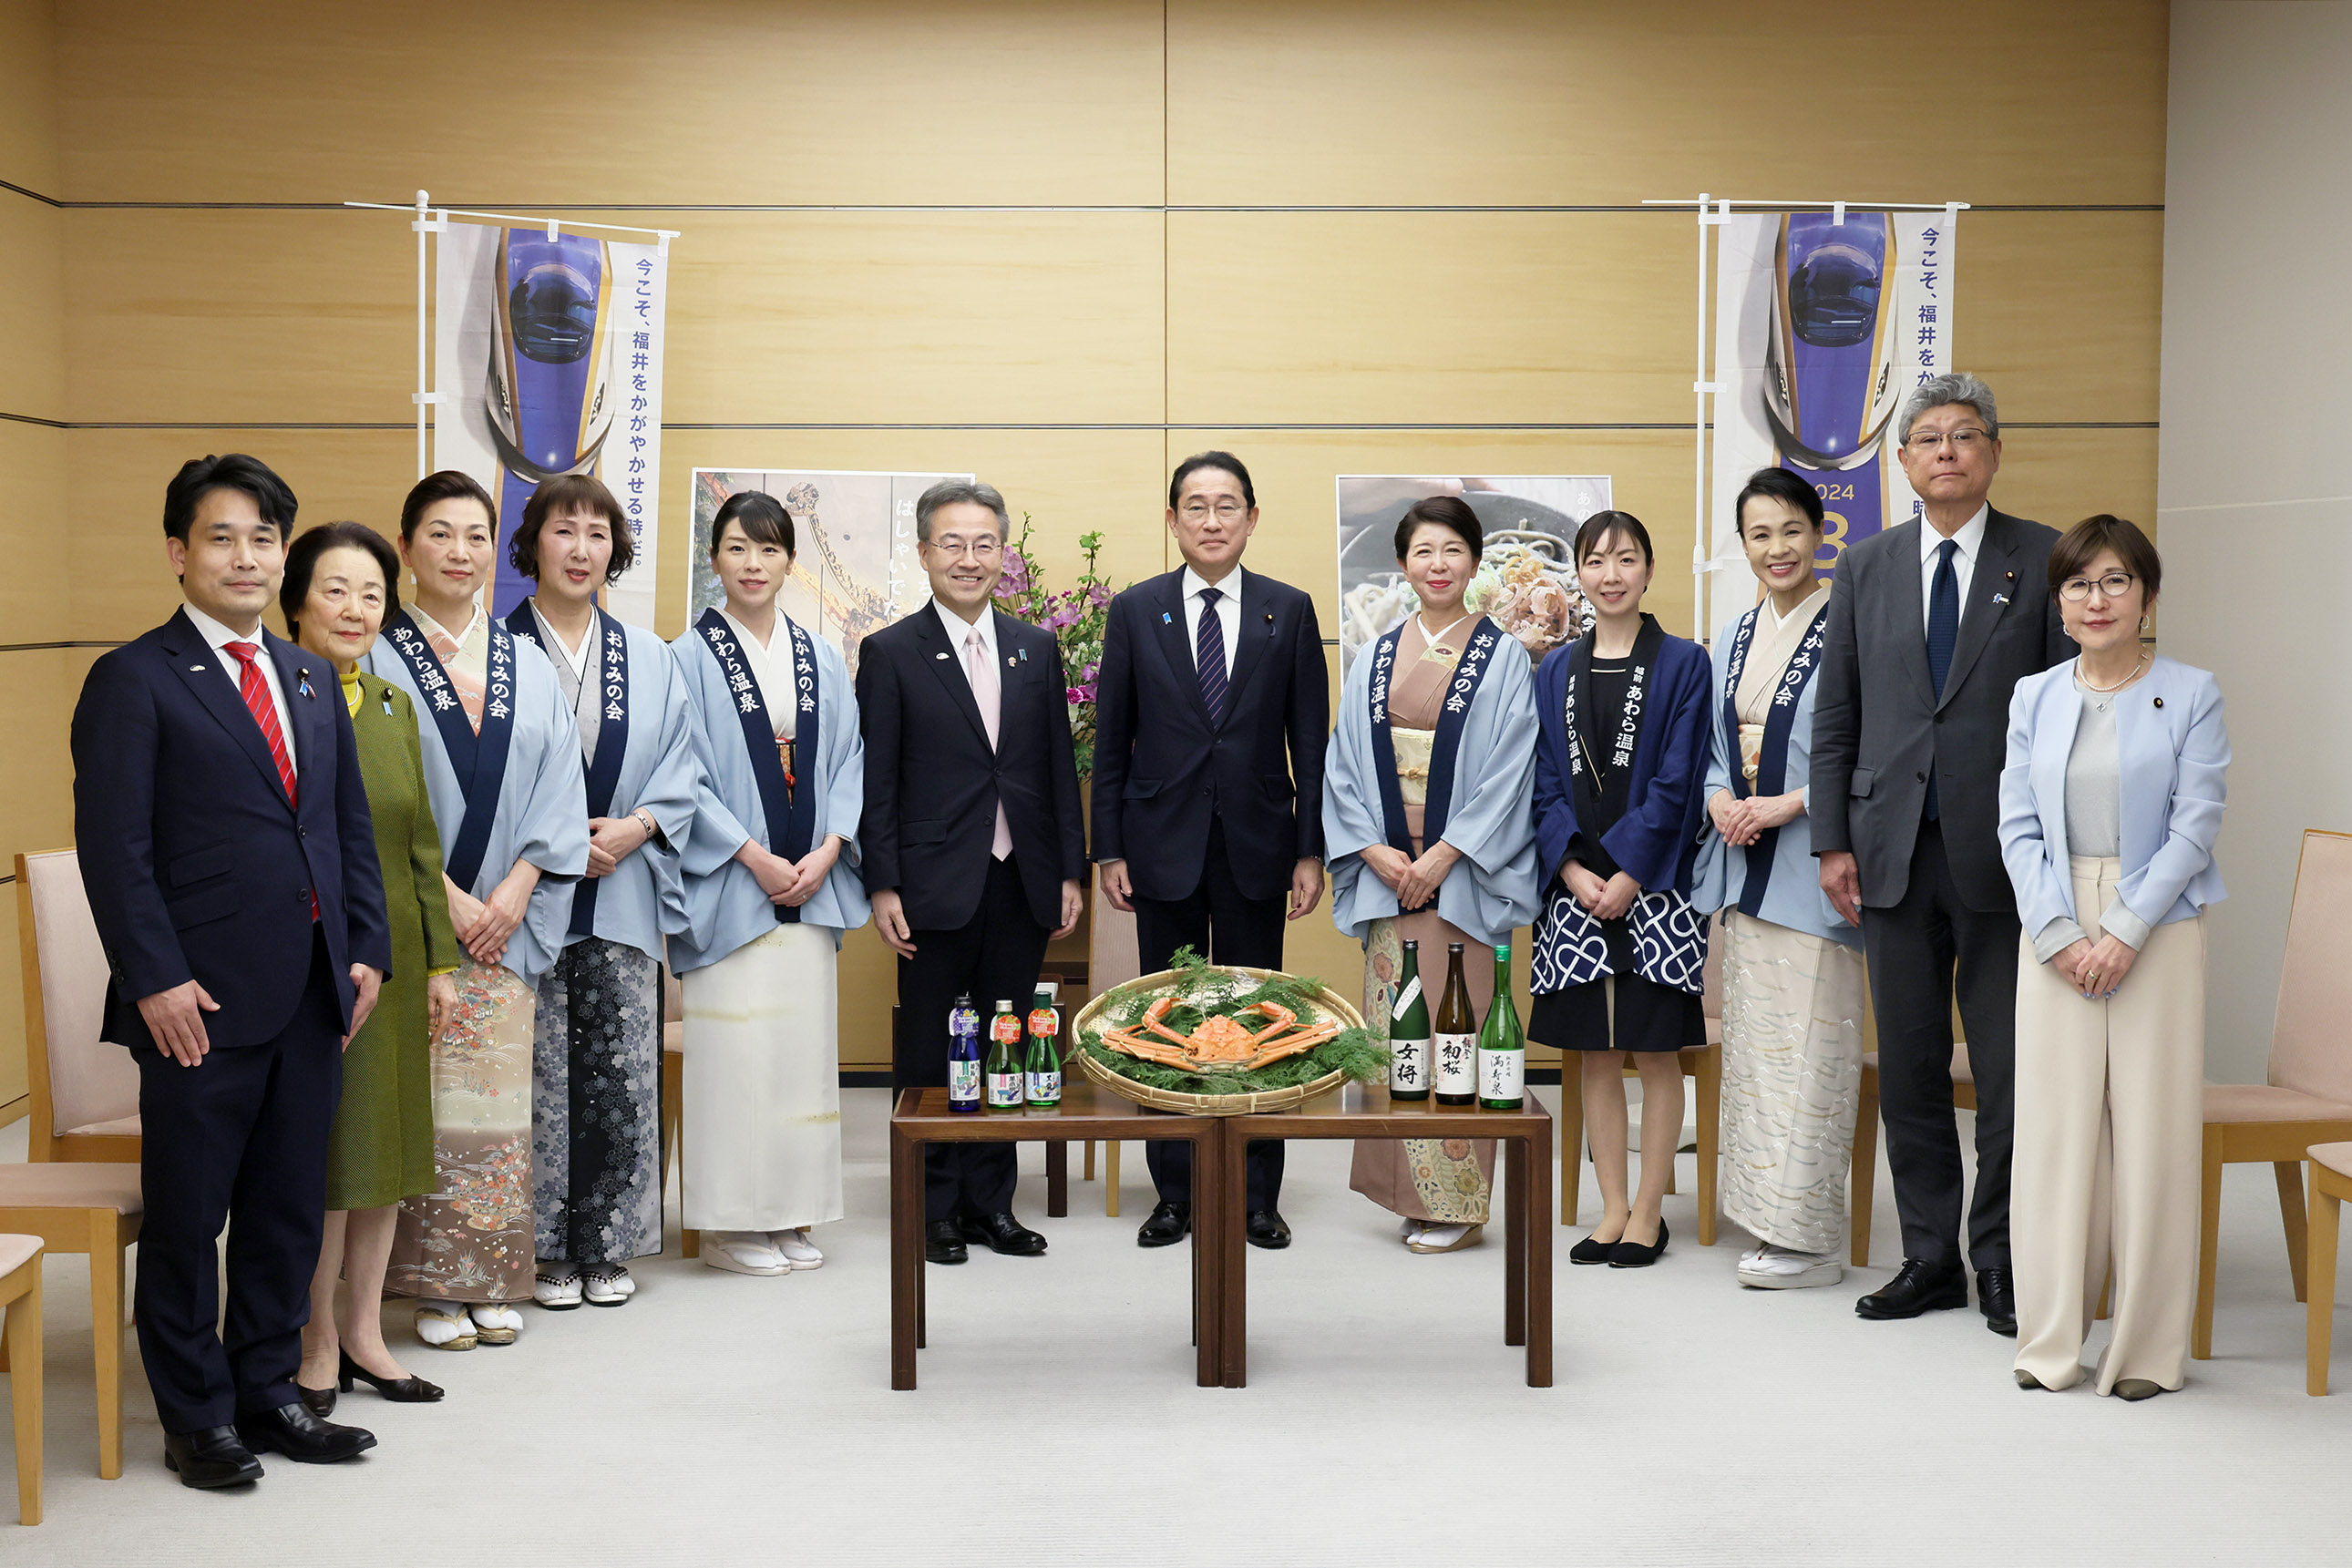 Courtesy Call from the Governor of Fukui Prefecture and Others